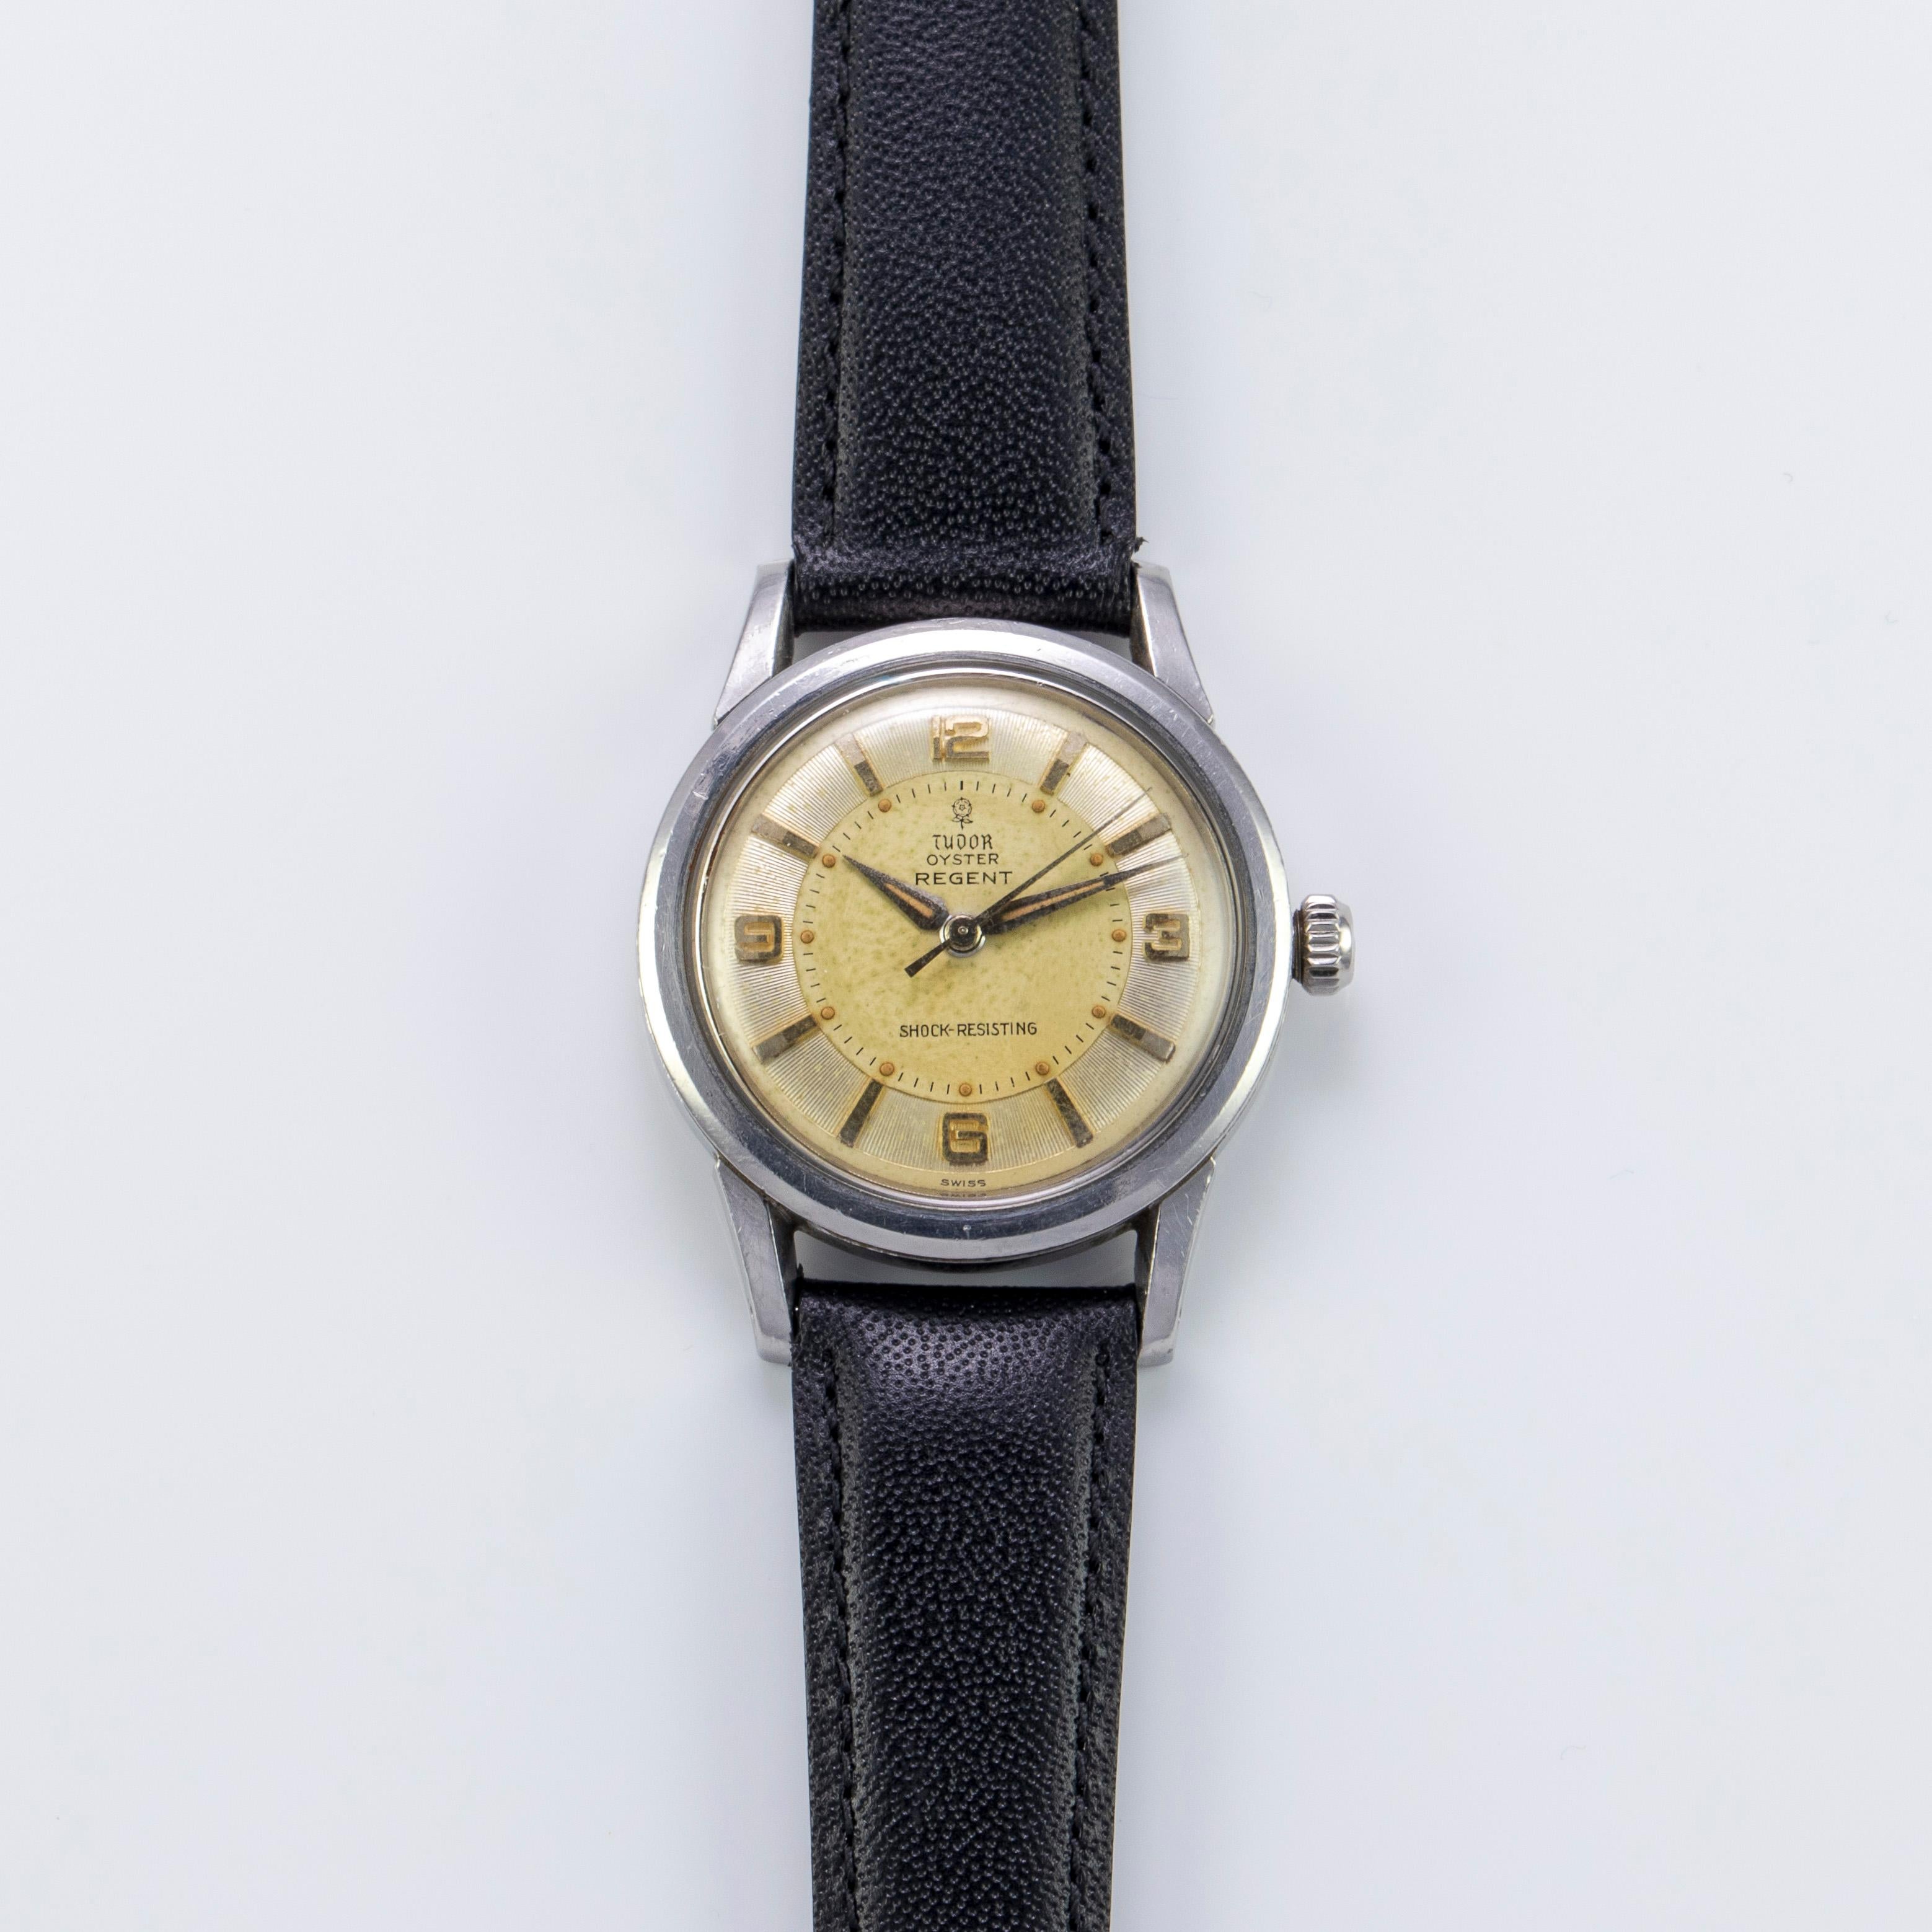 Tudor Stainless Steel Oyster Regent Manual Wind Wristwatch
Factory Silver Decorated Dial with Arabic Numerals and Beautiful Luminous Plots with Patina
Stainless Steel Smooth Bezel
 34mm Case 
Tudor Manual Wind Movement
Acrylic Crystal
Early 1960s